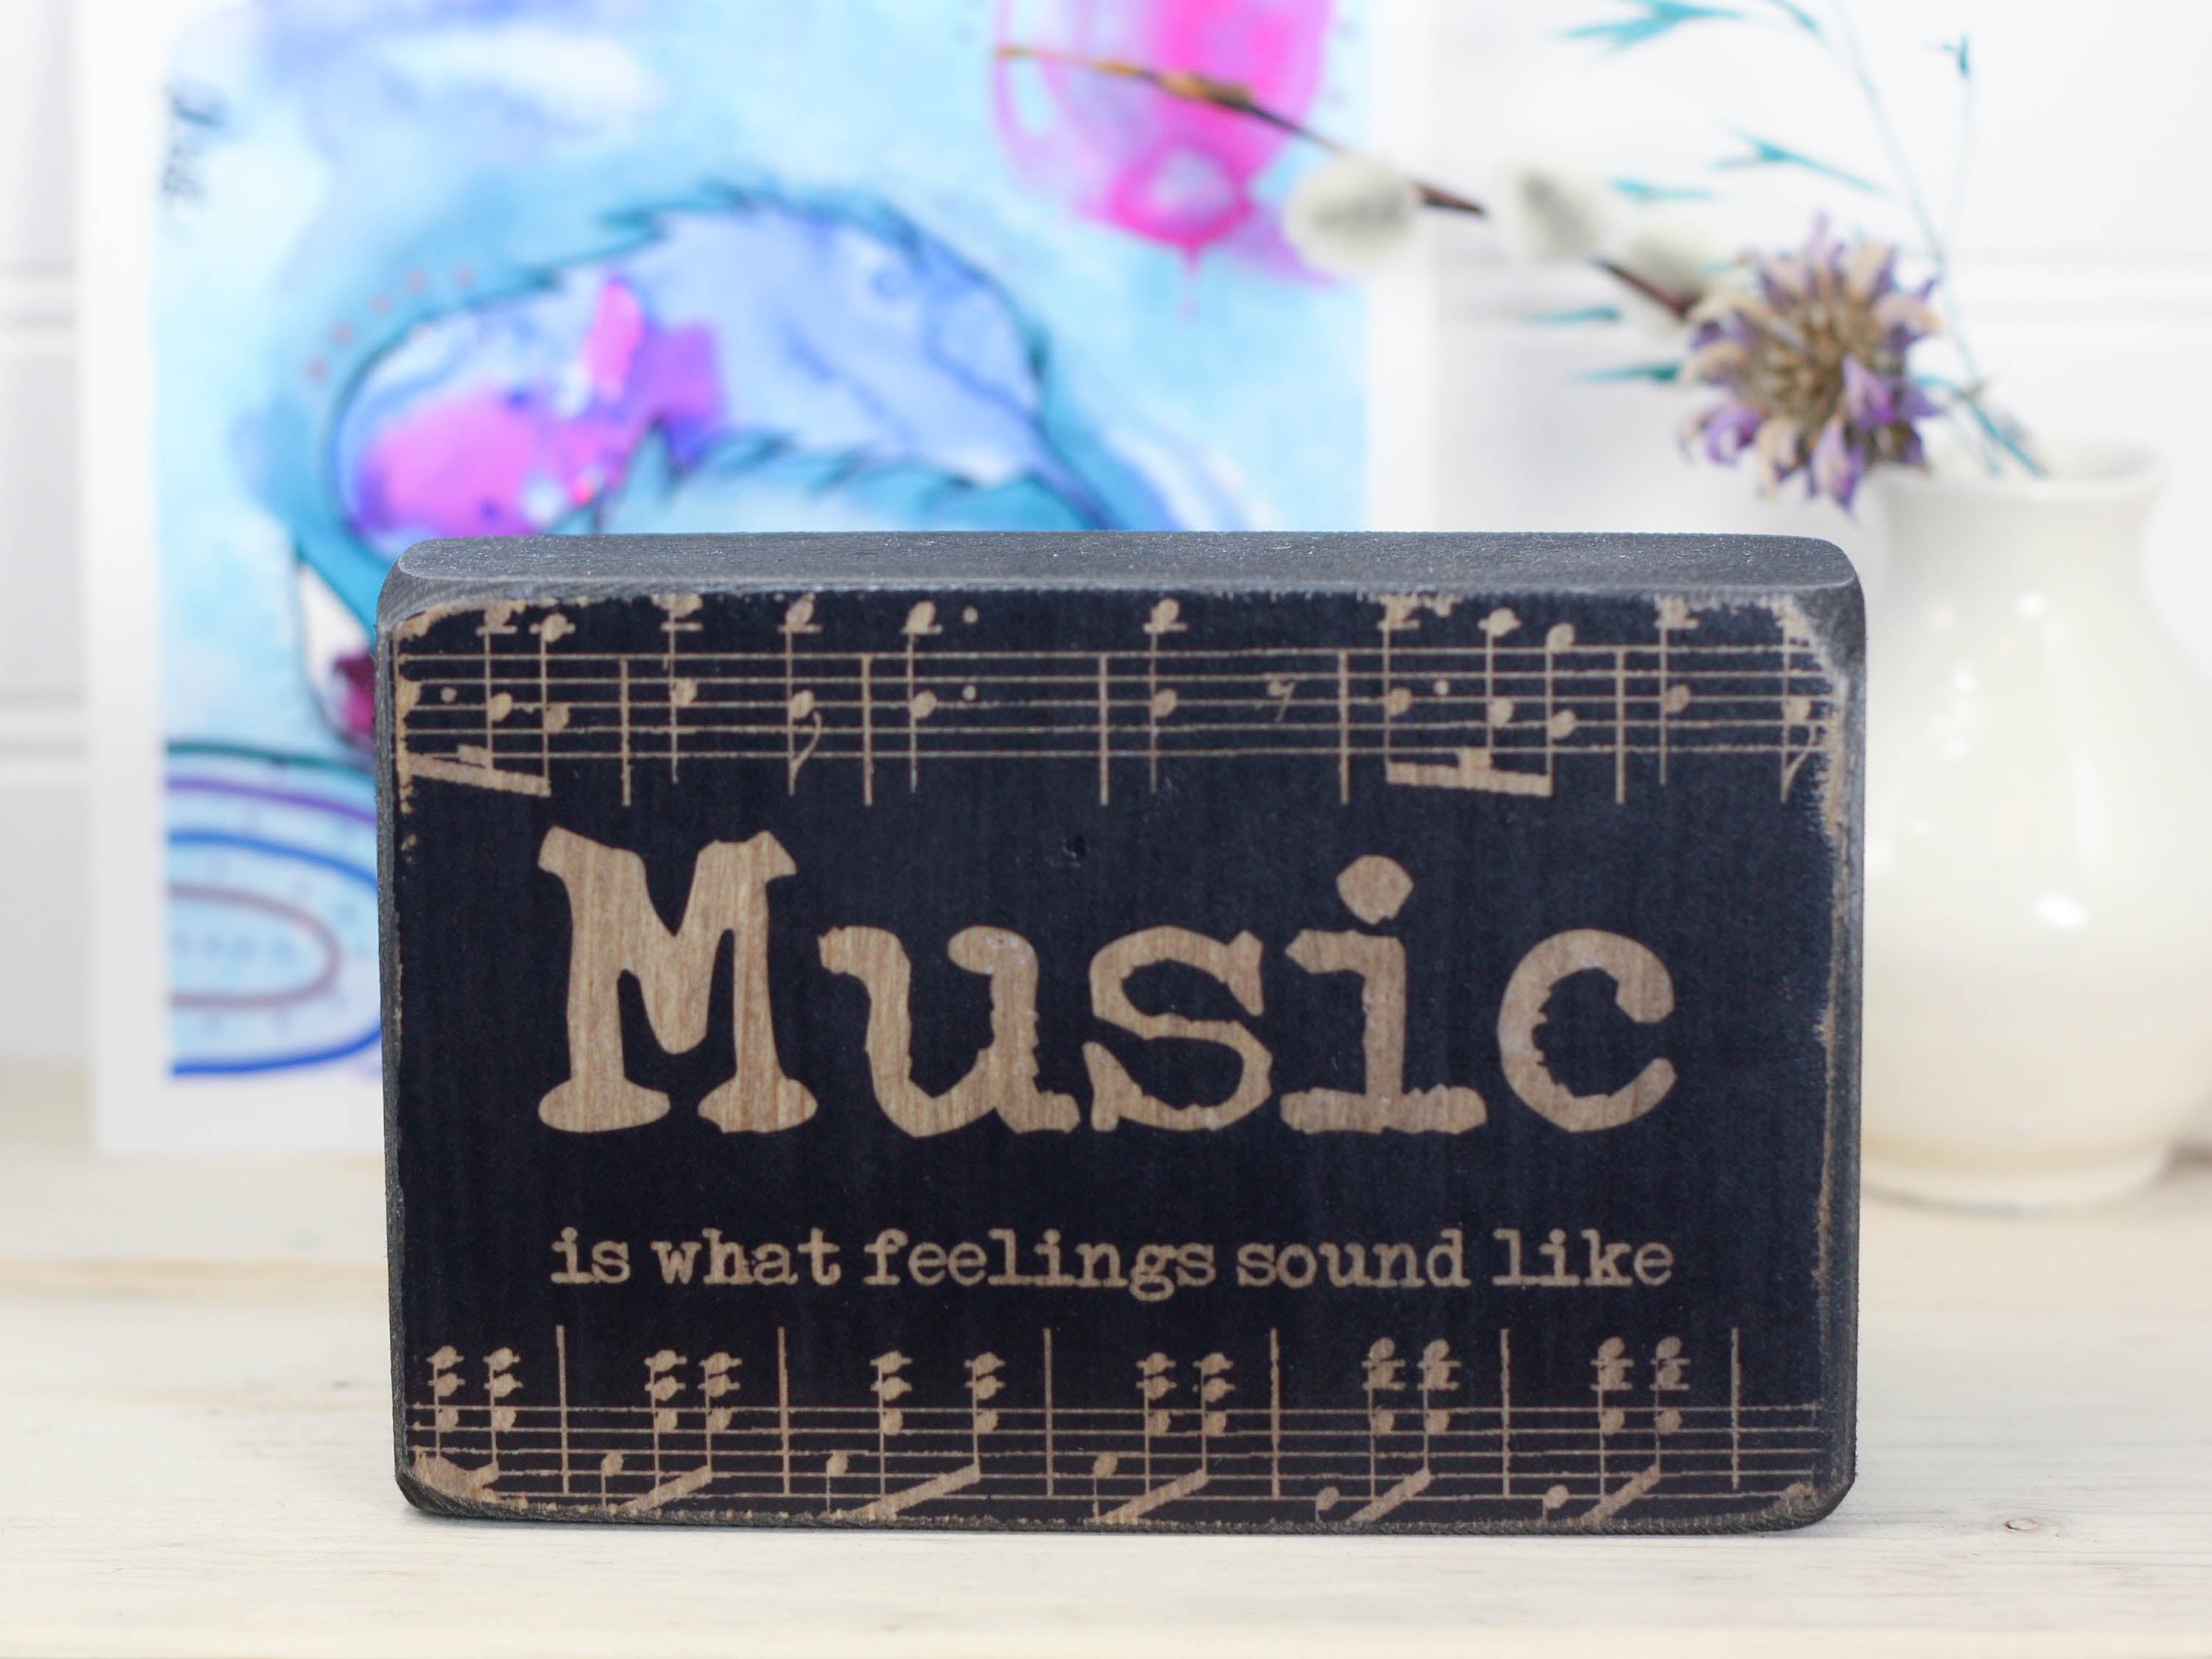 Small wood sign in distressed black with music notes and the saying "Music is what feelings sound like".